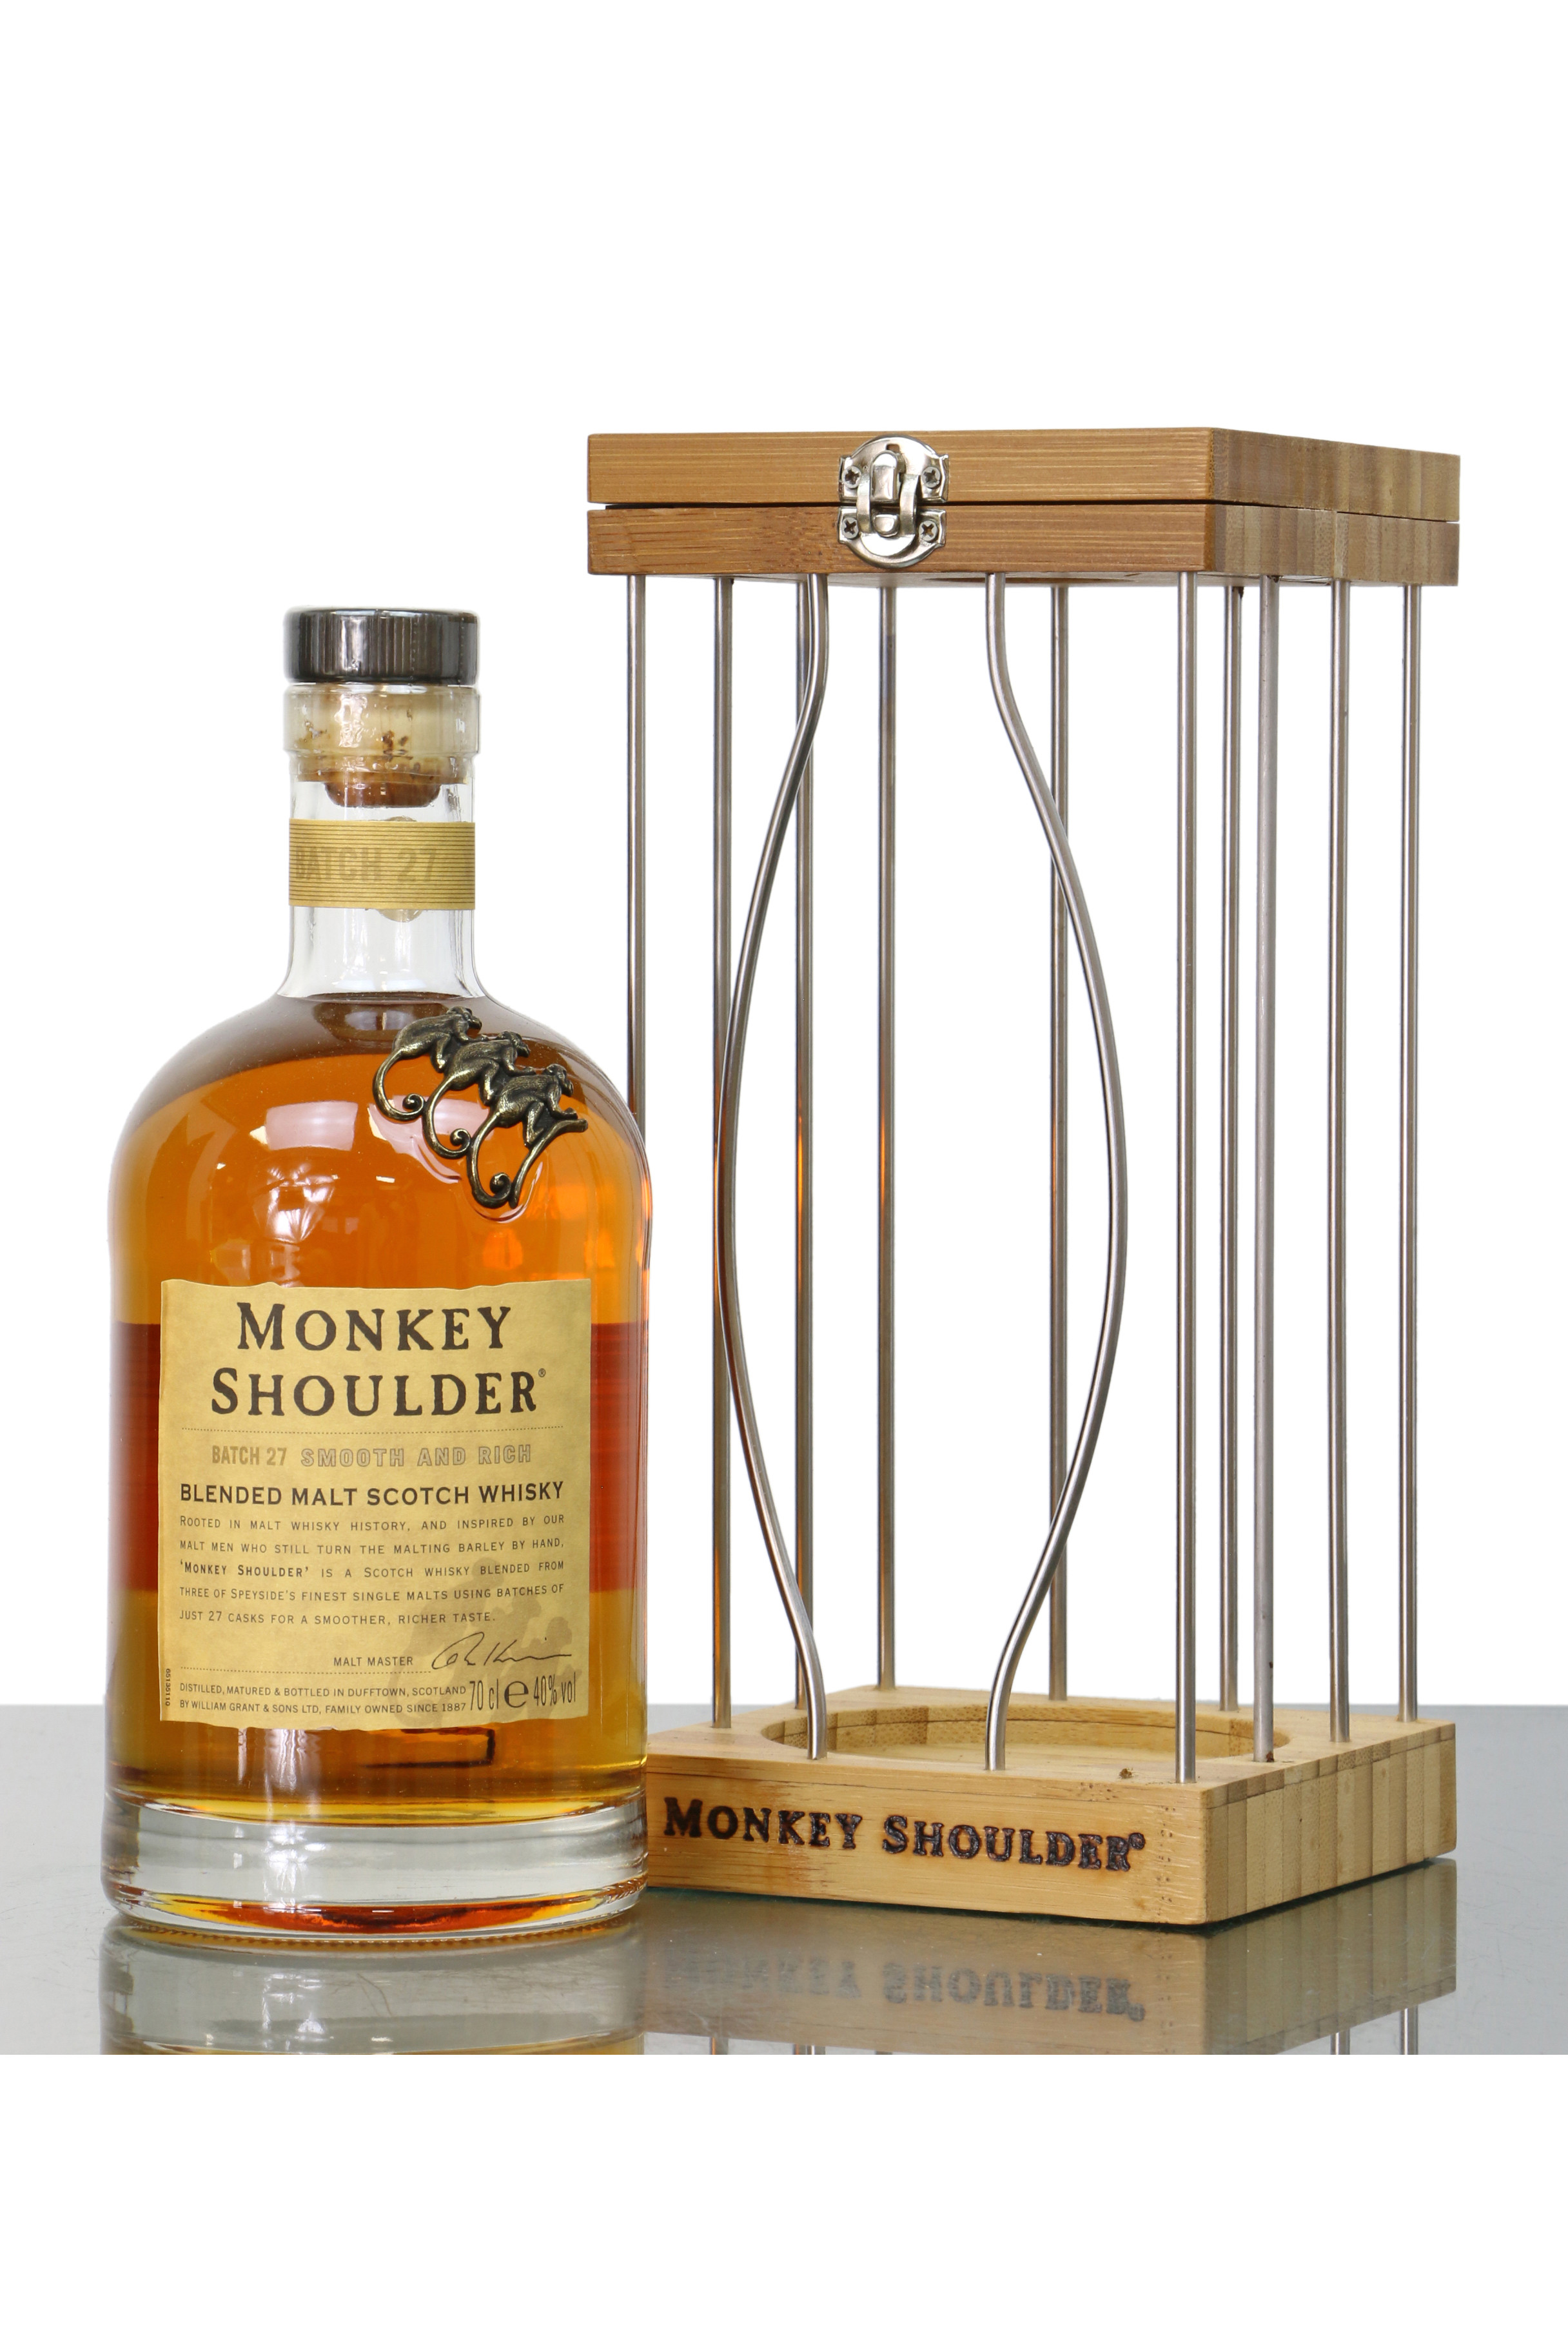 Limited Whisky Monkey Just Auctions Shoulder Edition 27 Cage - - Batch